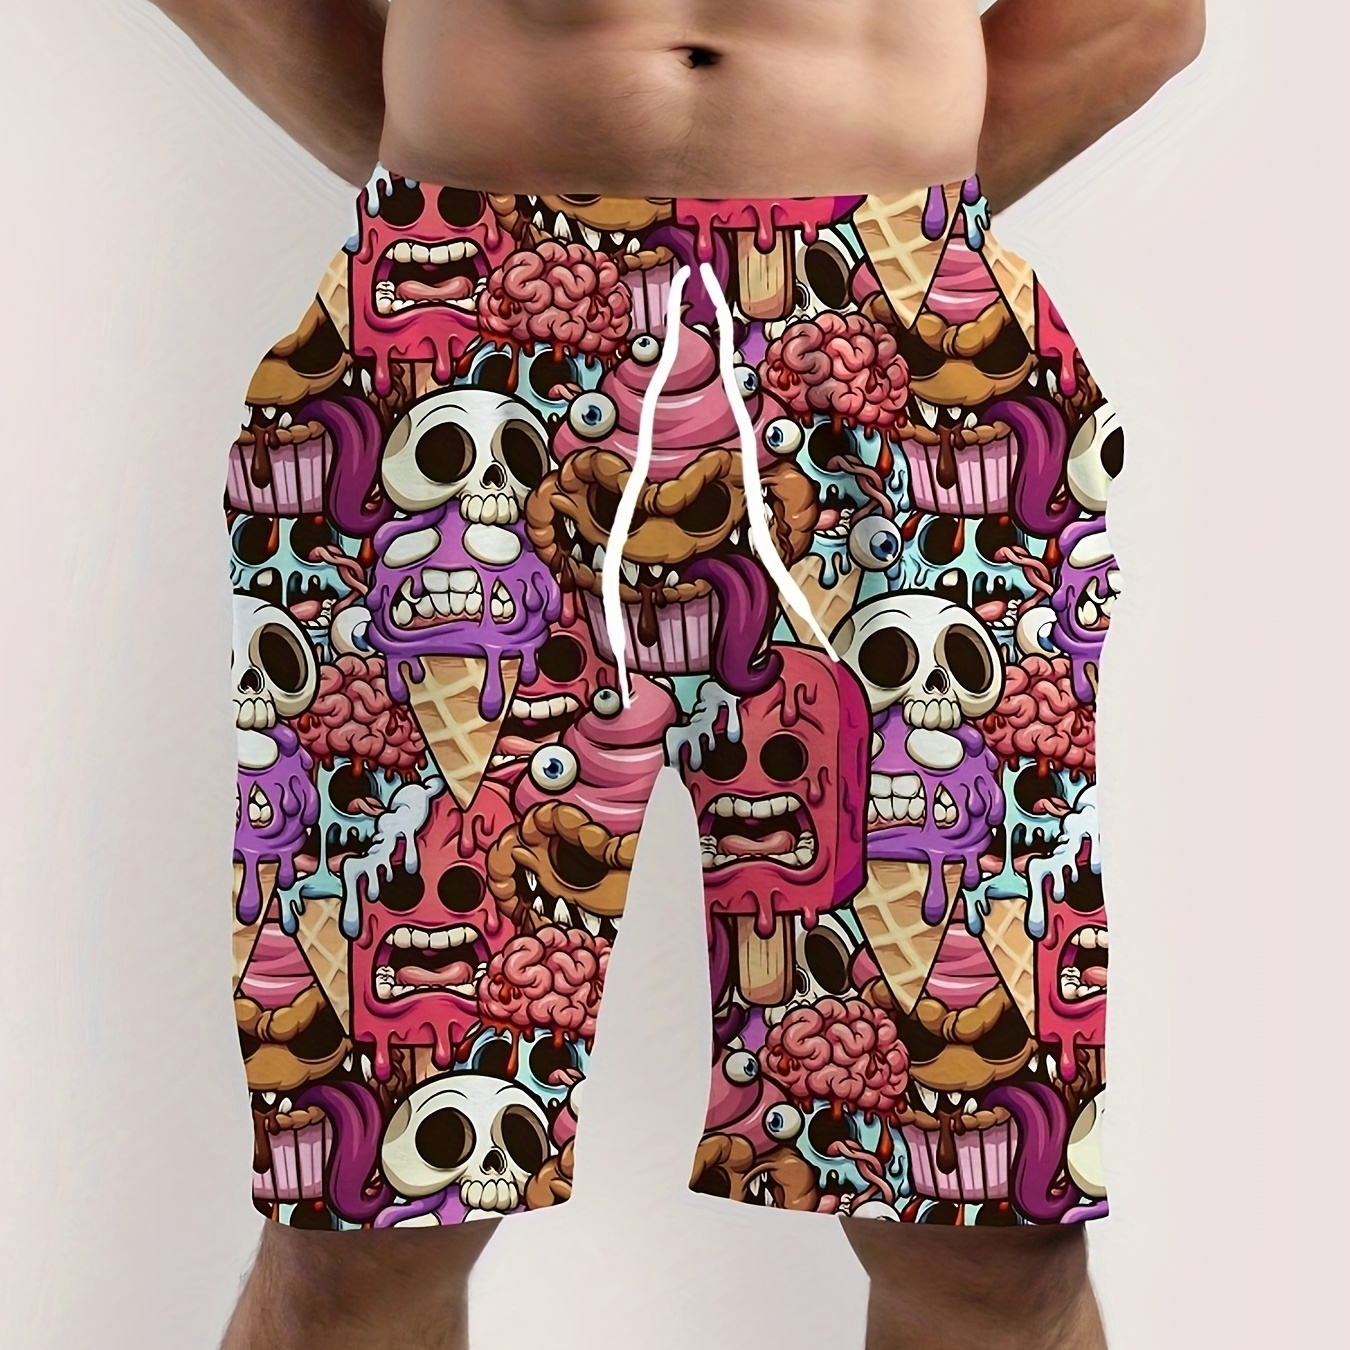 

Comic Style Skull And Ice Pop Pattern Shorts With Drawstring And Pockets, Novel And Chic Shorts Suitable For Summer Street, Sports And Beach Wear